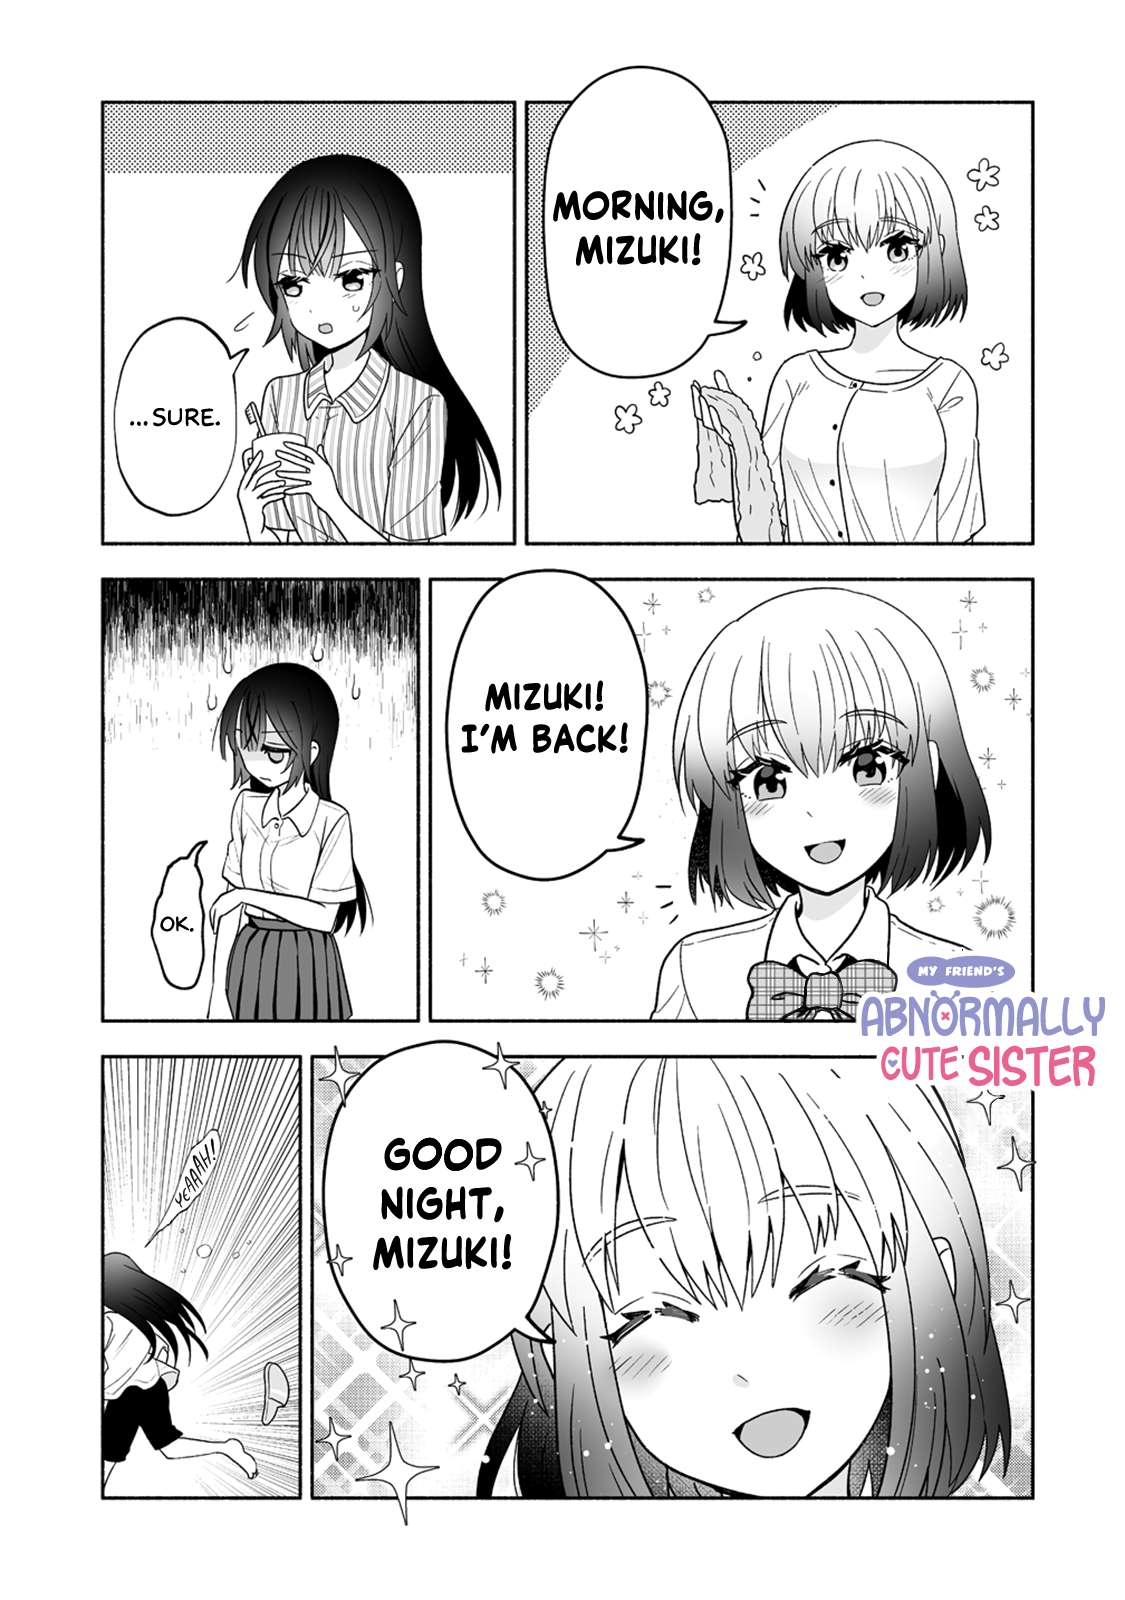 My Friend's Abnormally Cute Sister - chapter 5 - #1